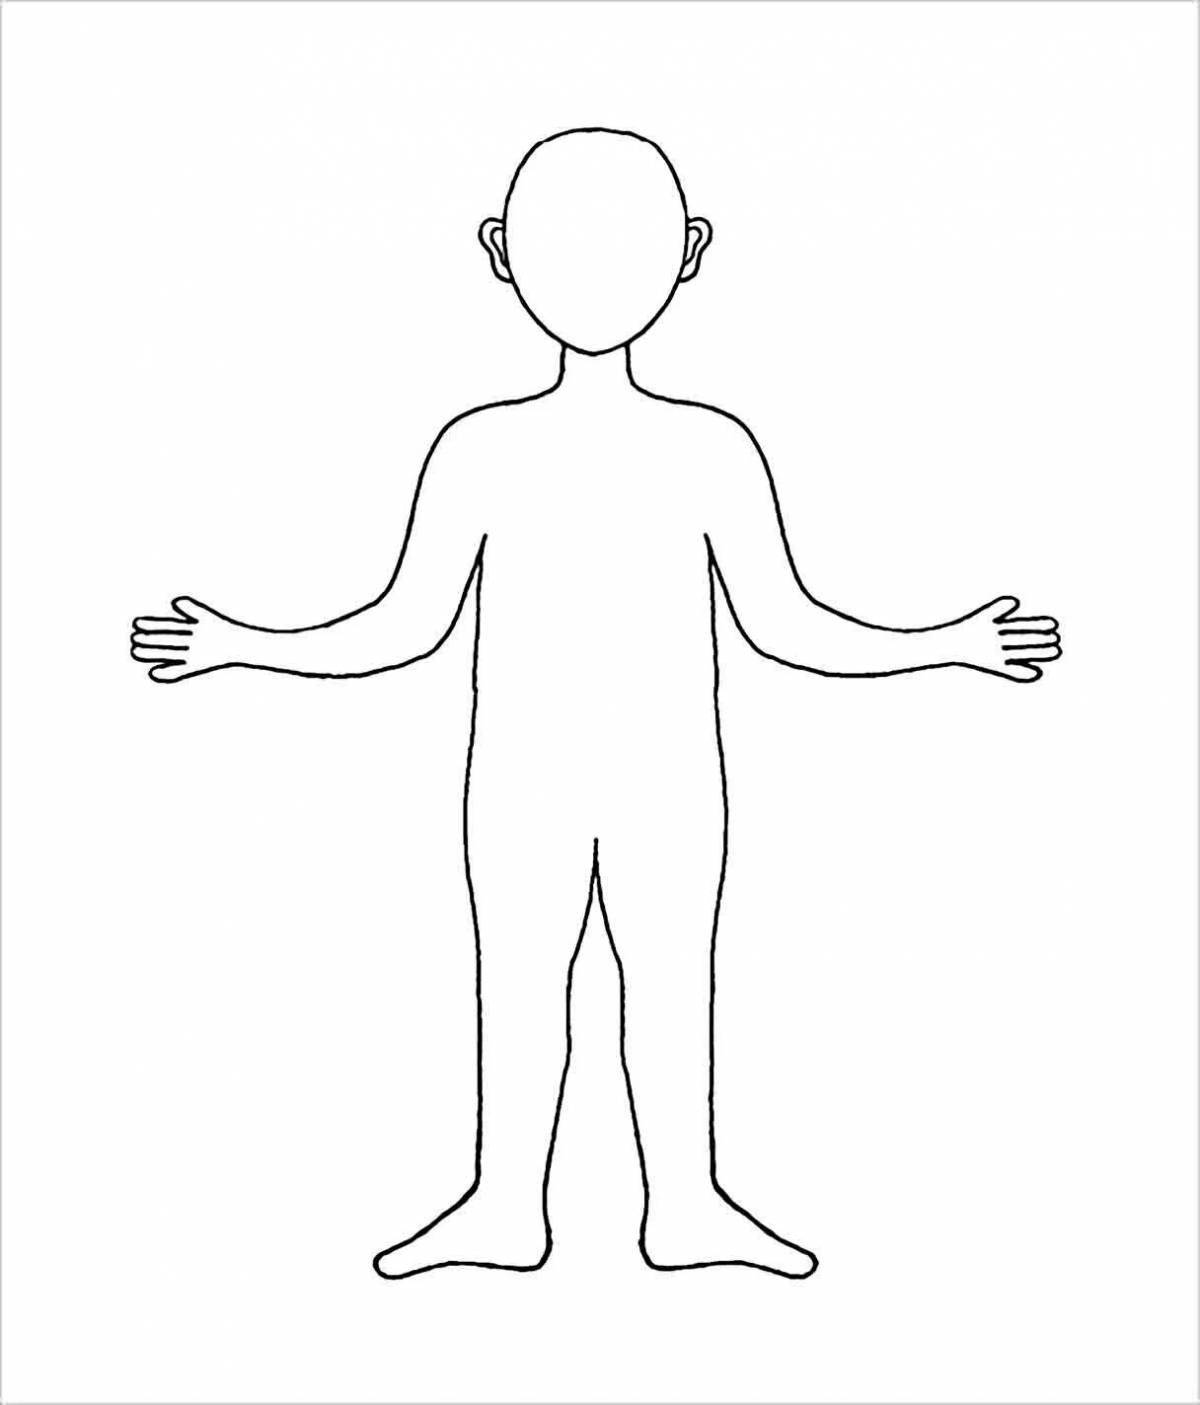 Coloring page charming human figure